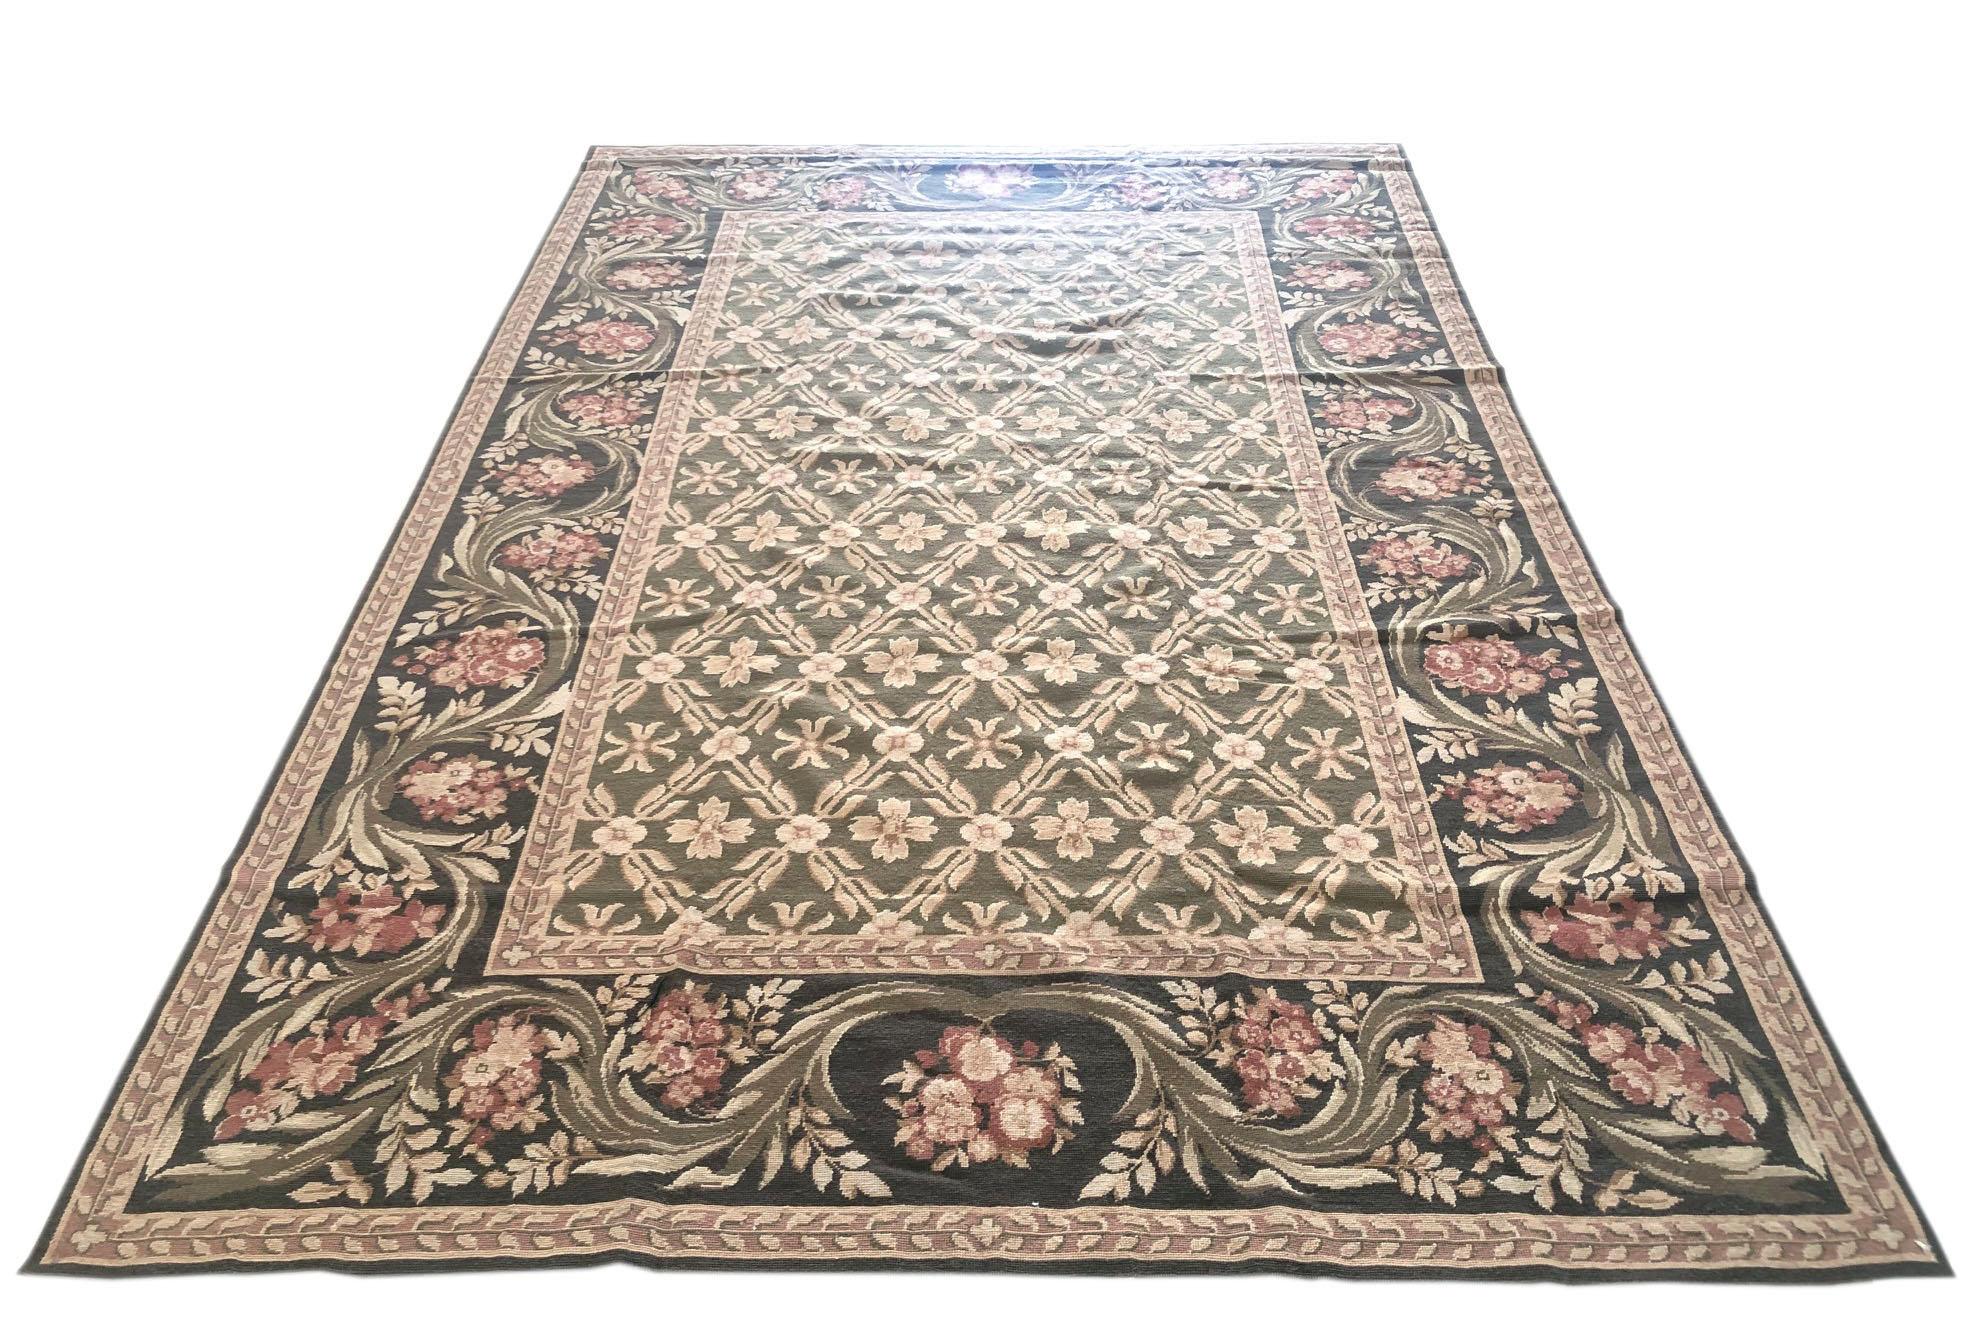 This piece is a floral diamond design needle point Chinese rug. The base color and border colors are both green in different tones. The size is 5 feet wide by 9 feet tall. This is a brand new rug.